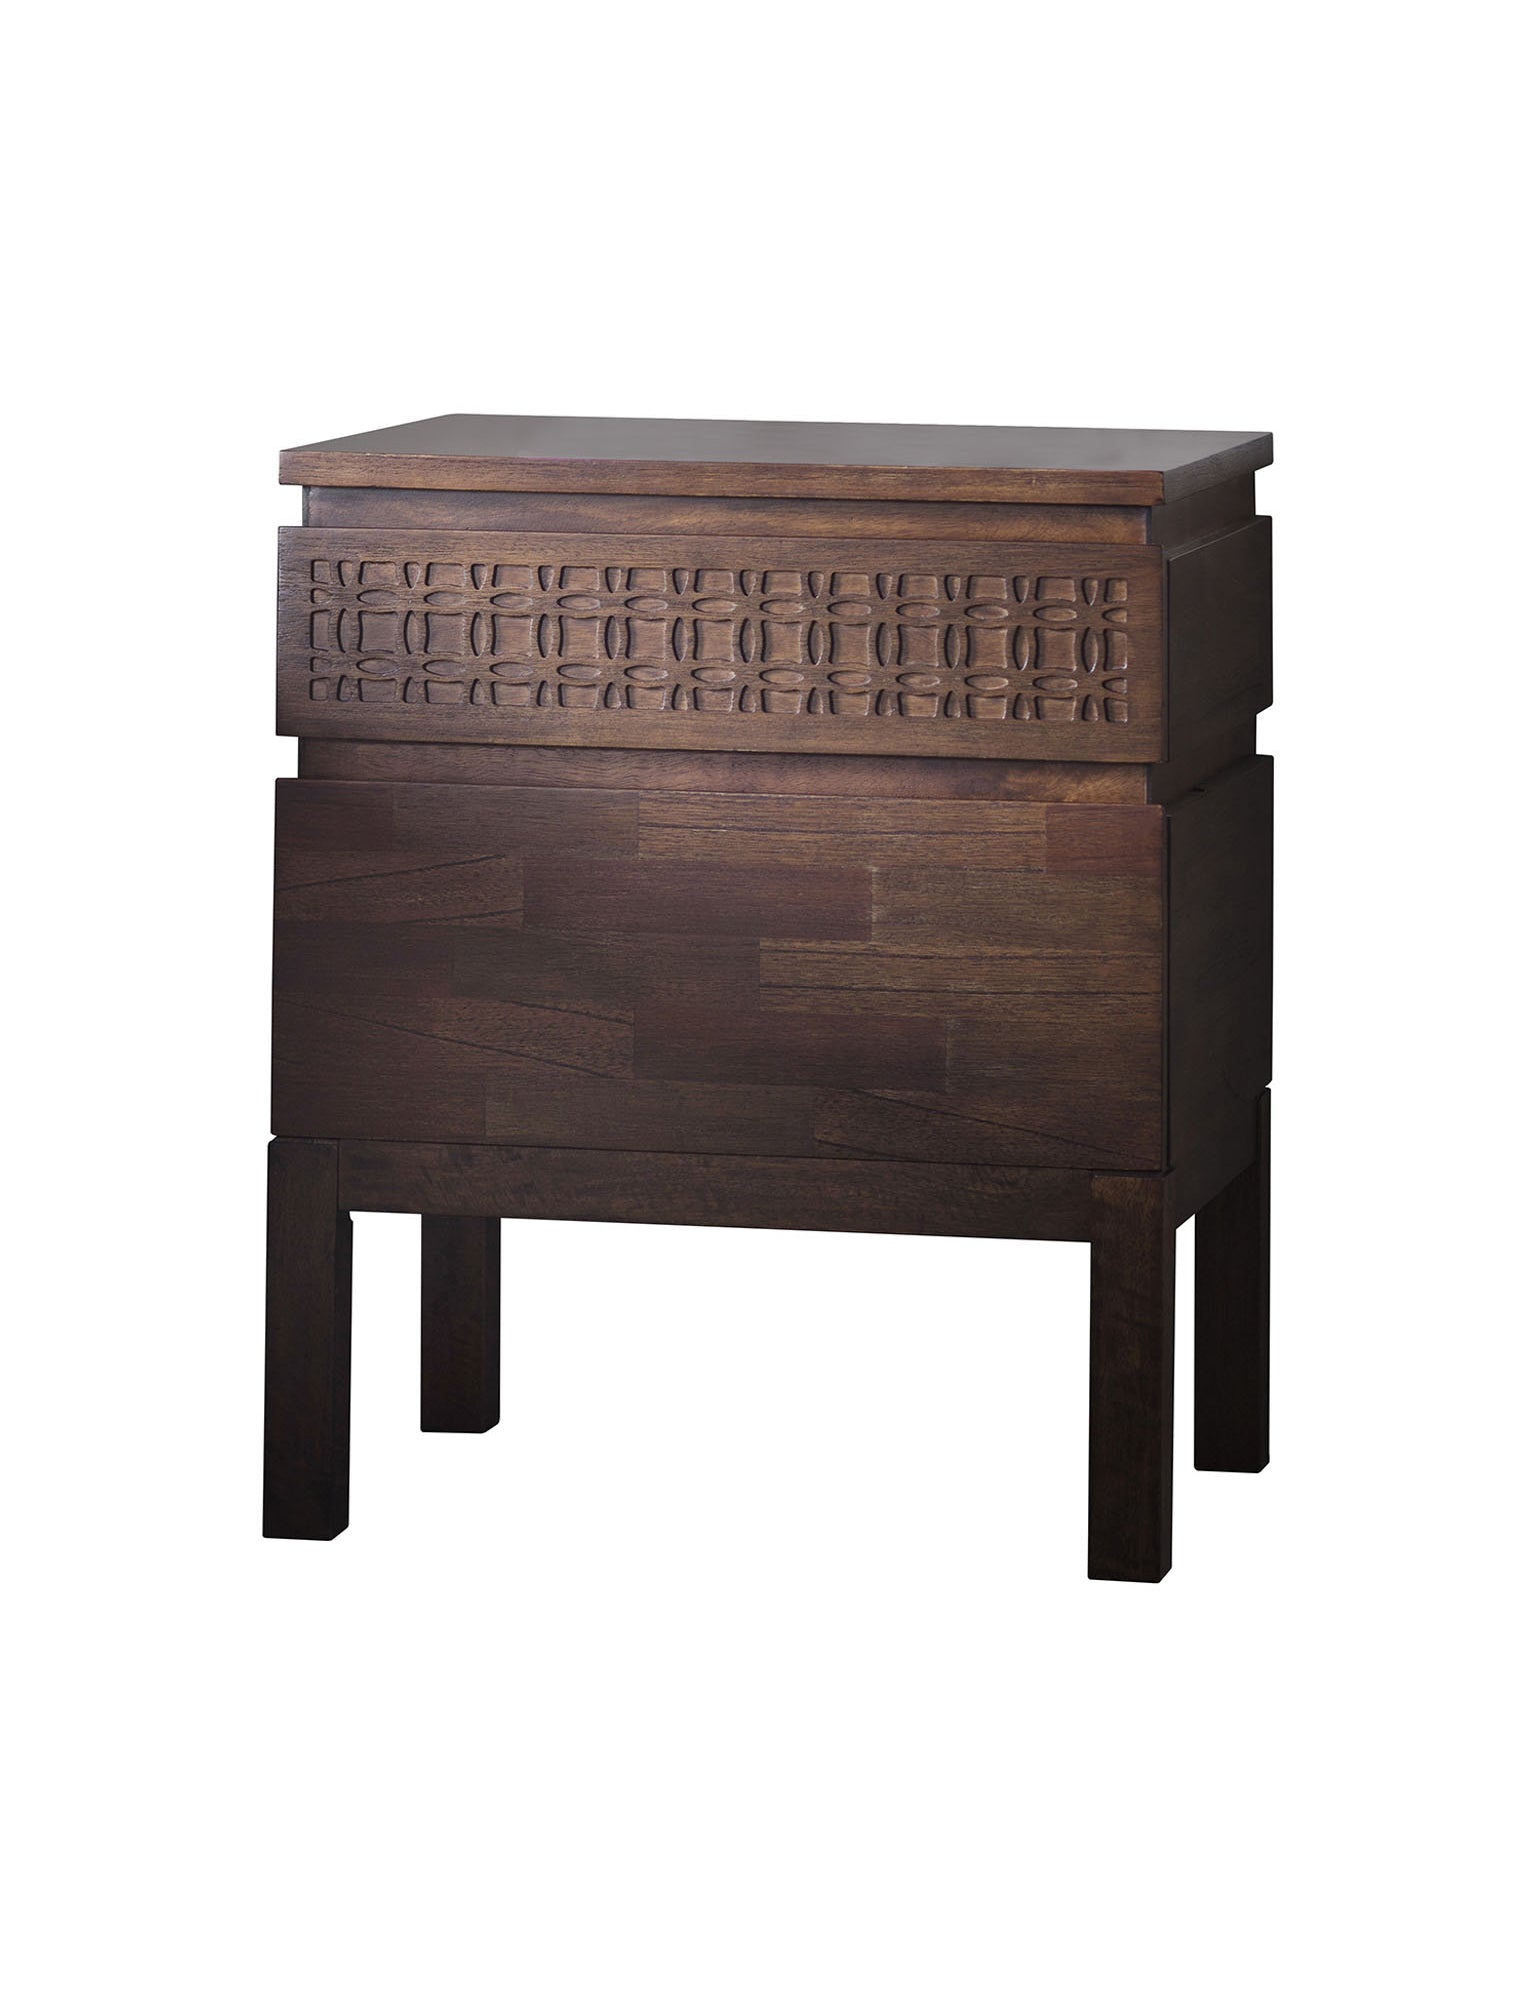 Agra Bedside Two Drawer Chest in Teak, Mahogany, Mindy Ash and Mango Wood